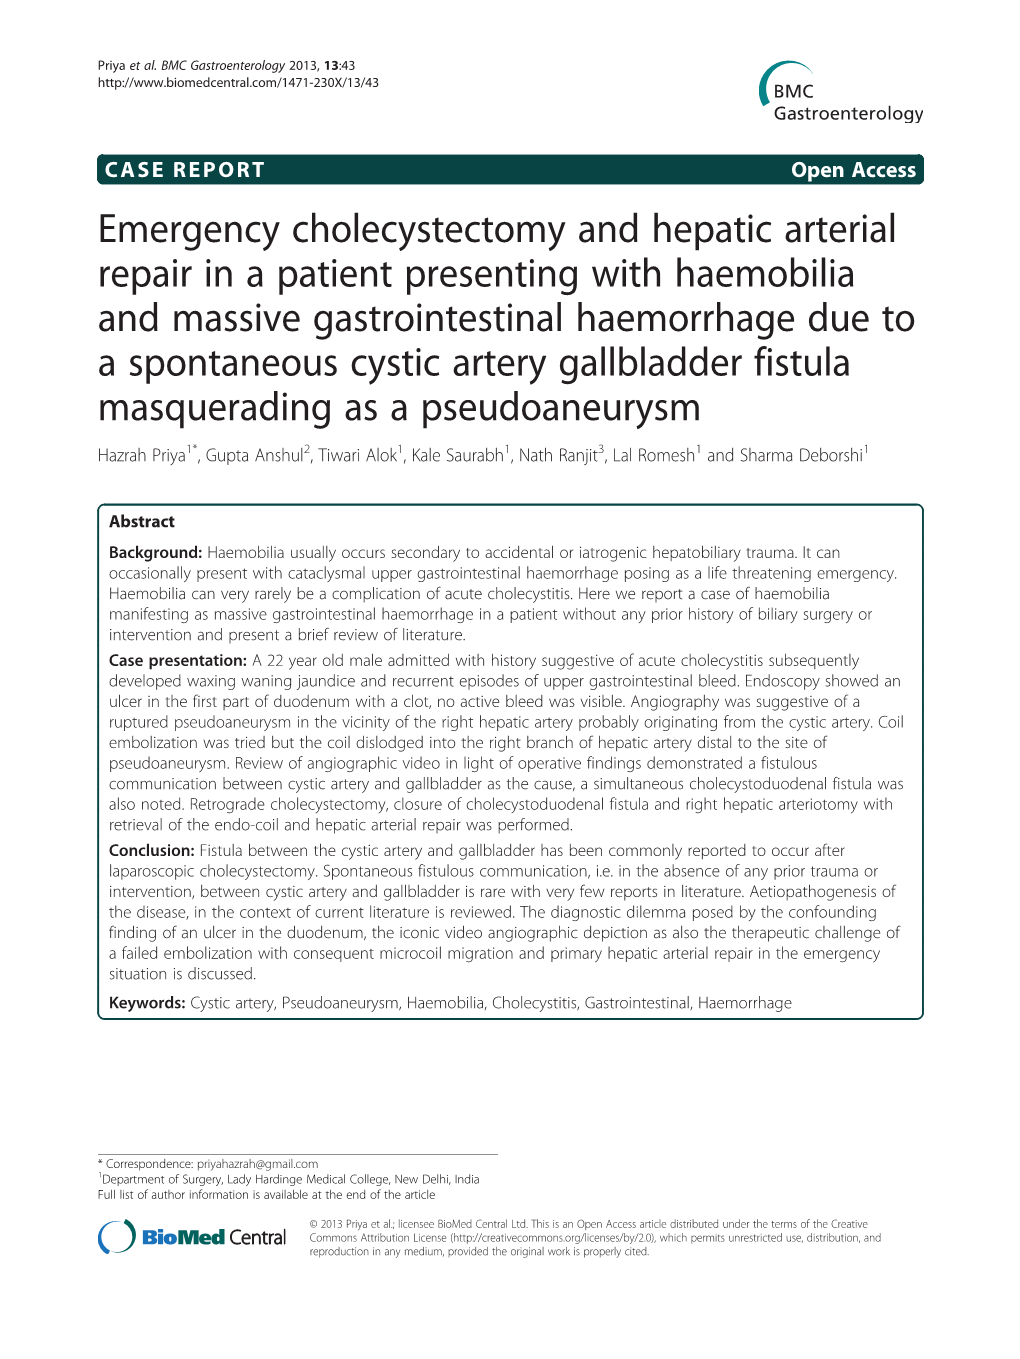 Emergency Cholecystectomy and Hepatic Arterial Repair in a Patient Presenting with Haemobilia and Massive Gastrointestinal Haemo